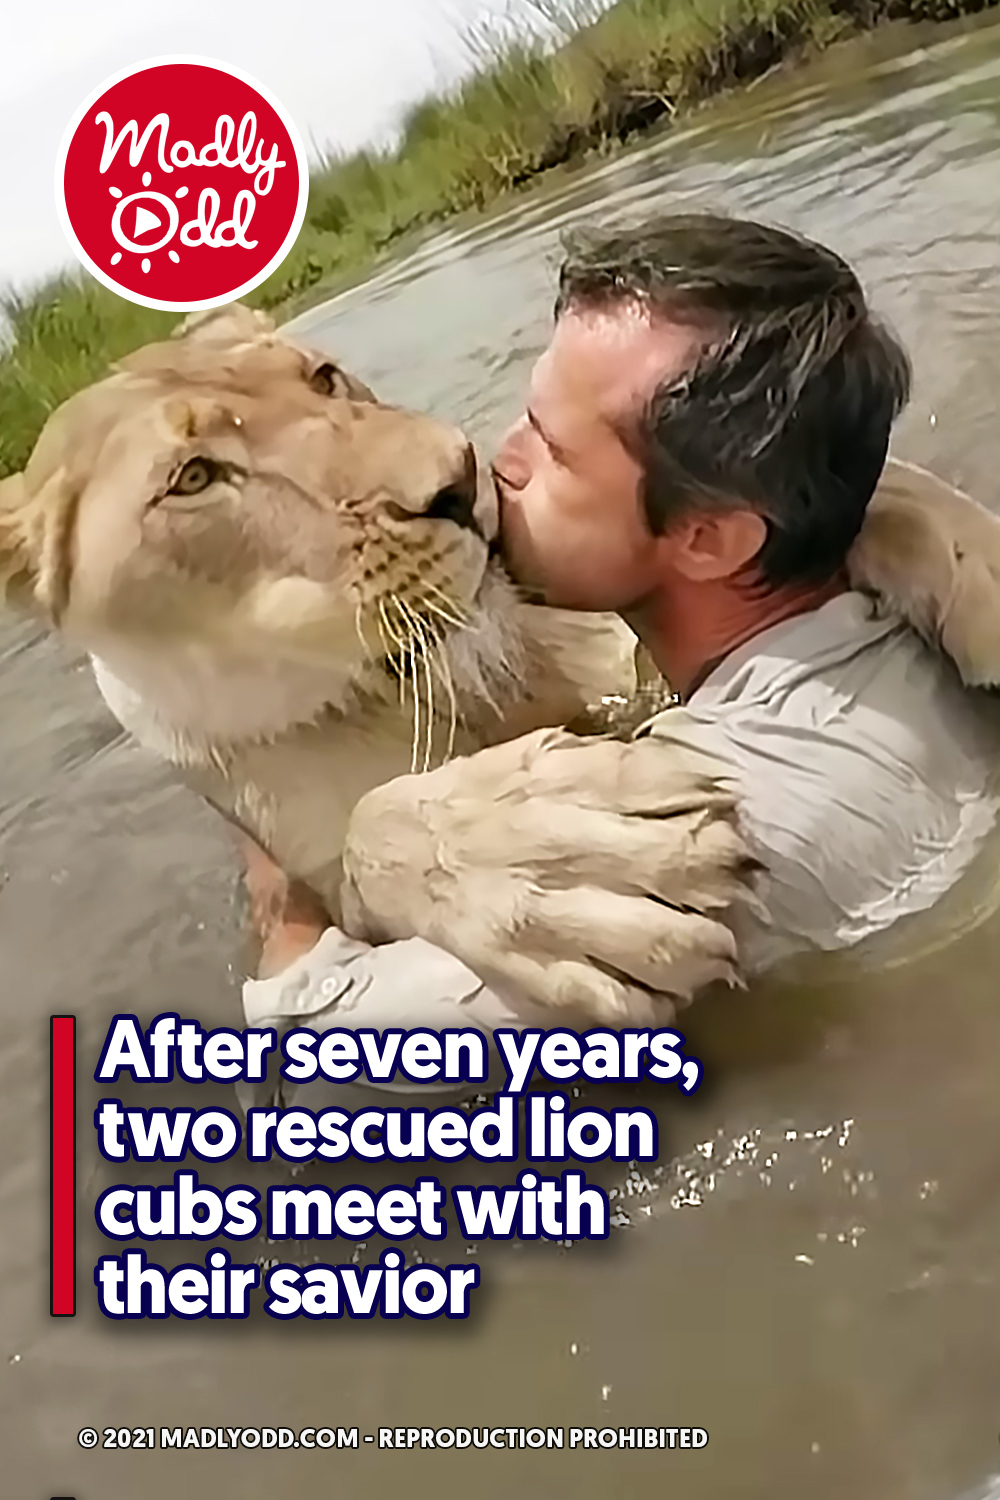 After seven years, two rescued lion cubs meet with their savior